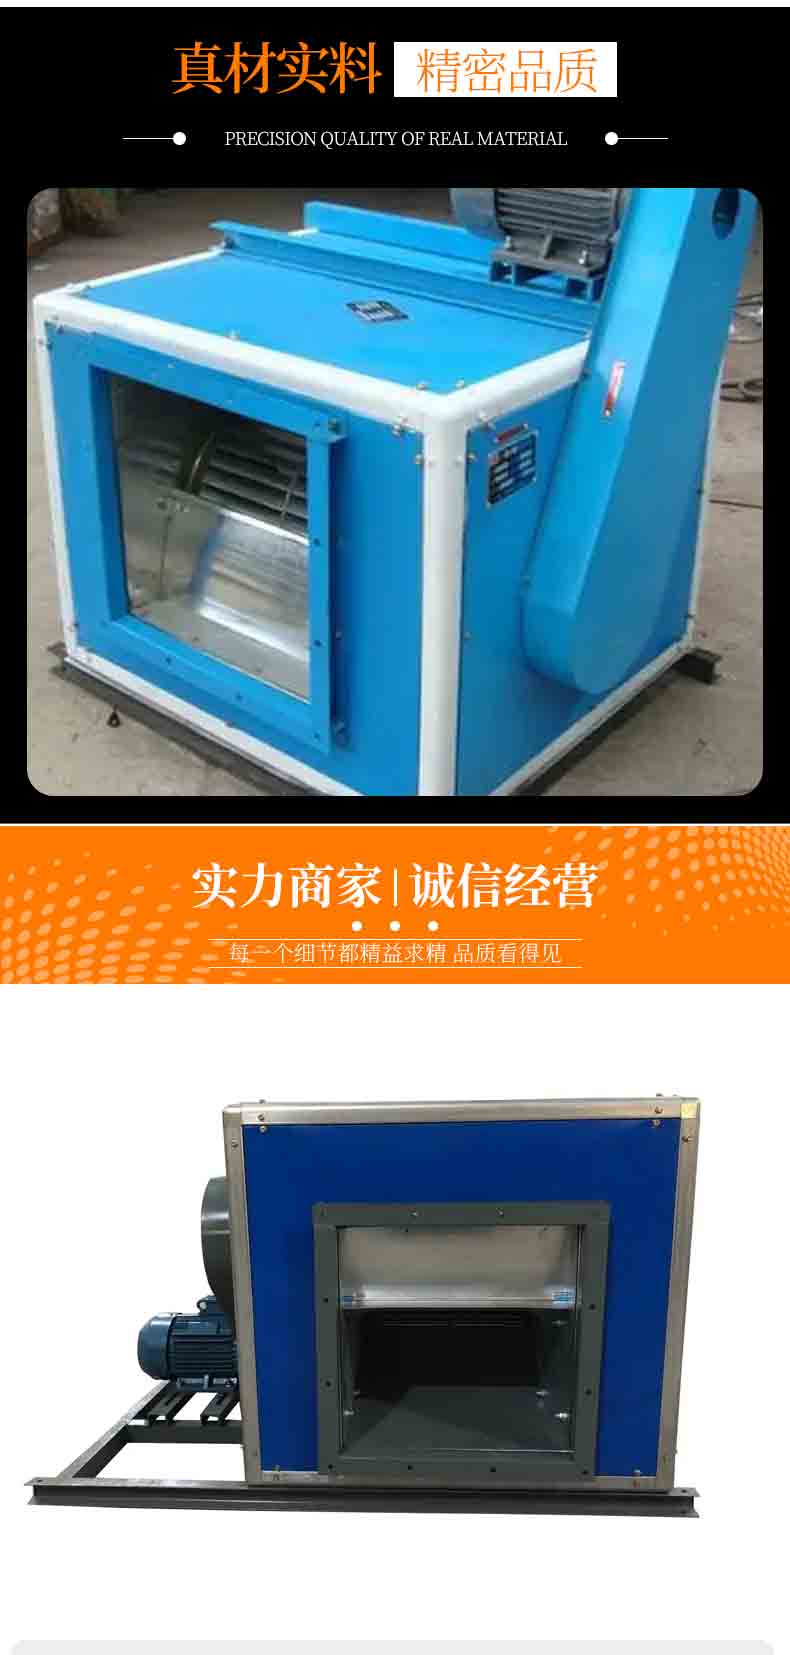 Kejin cabinet type centrifugal fan box, smoke exhaust fan, hotel kitchen, commercial box type, quiet and low noise source manufacturer